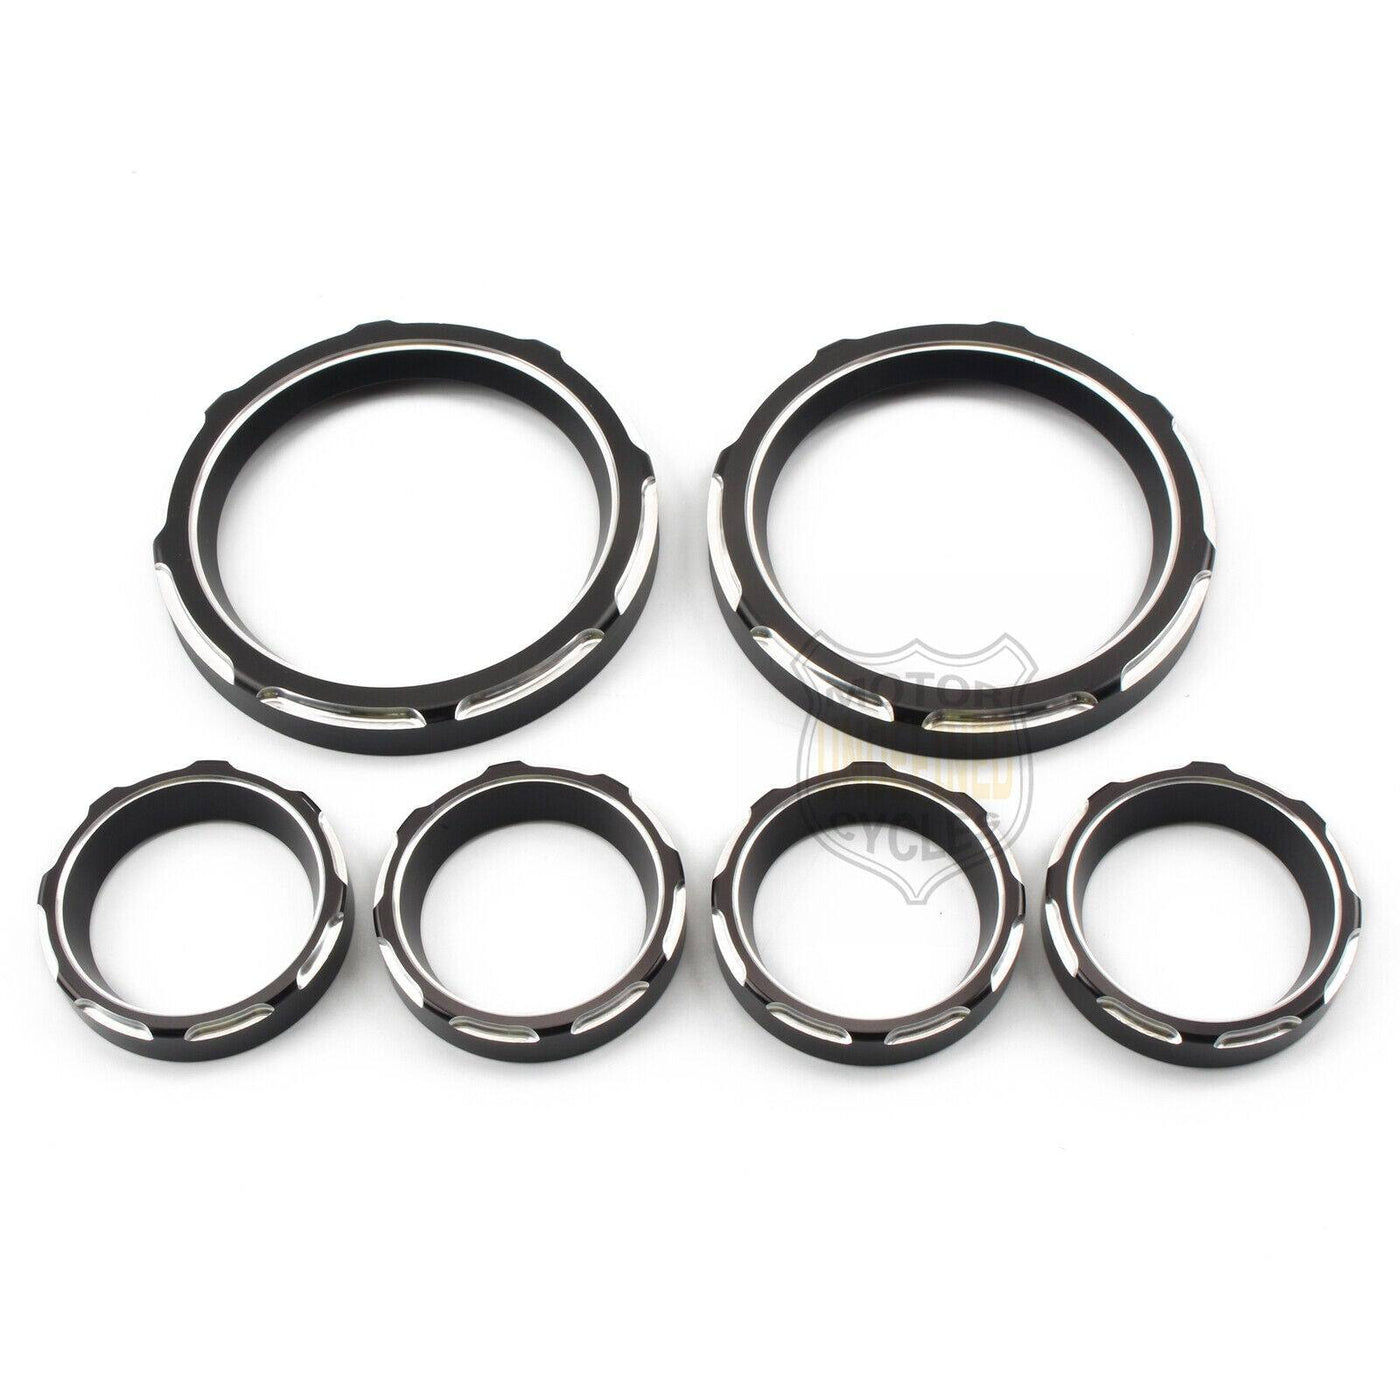 Black Instrument Board Gauge Bezel Covers For Harley Electra Street Glide 96-13 - Moto Life Products